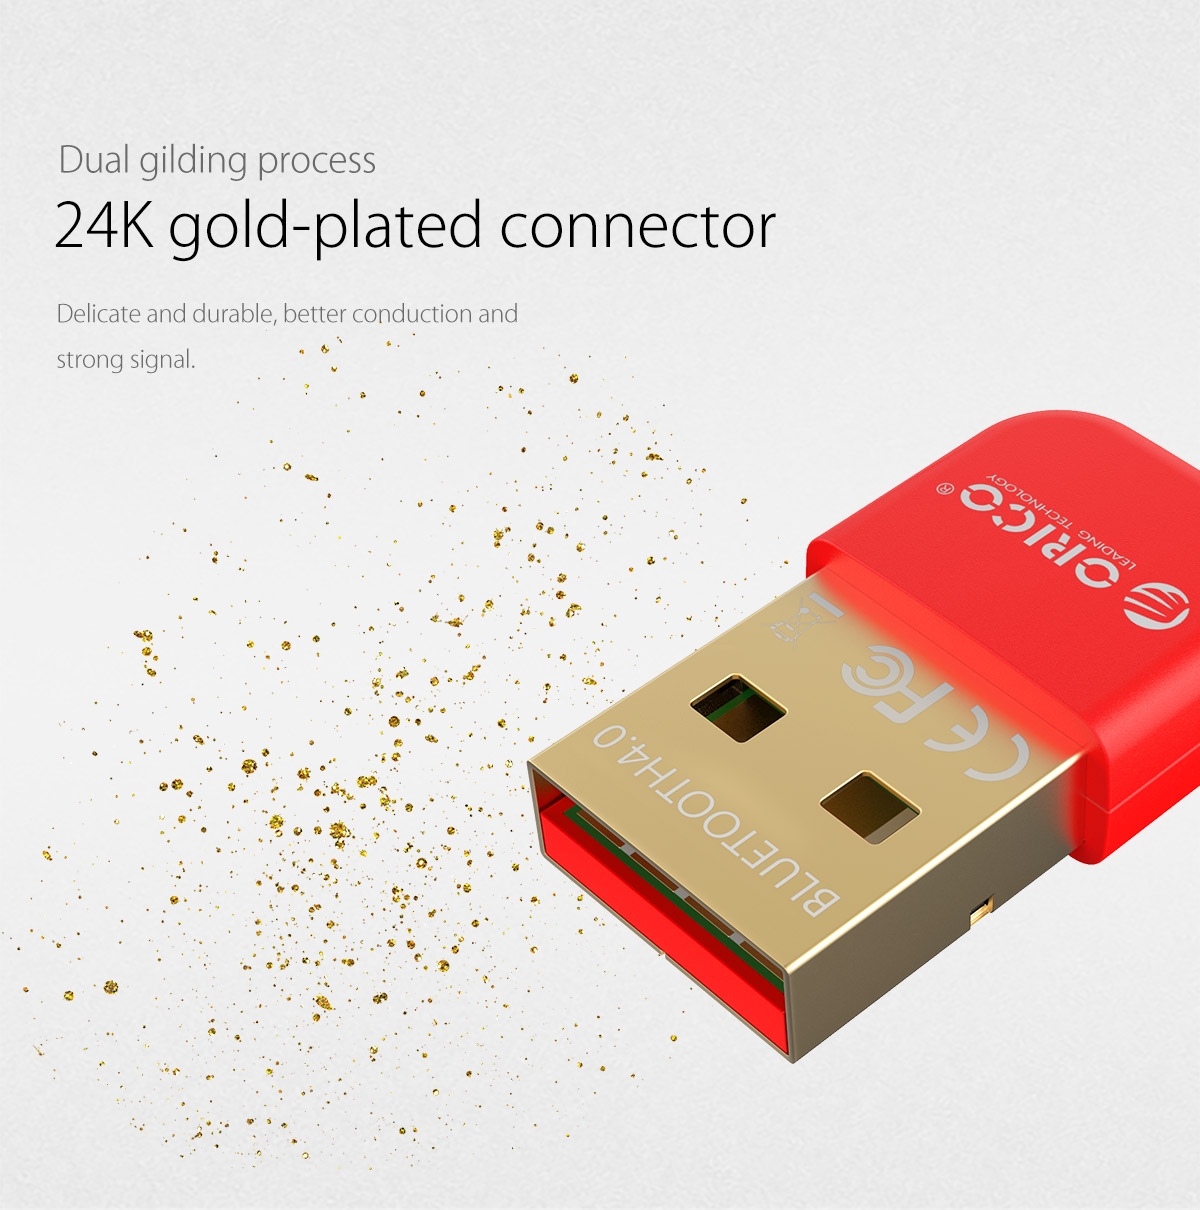 24K gold-plated connector